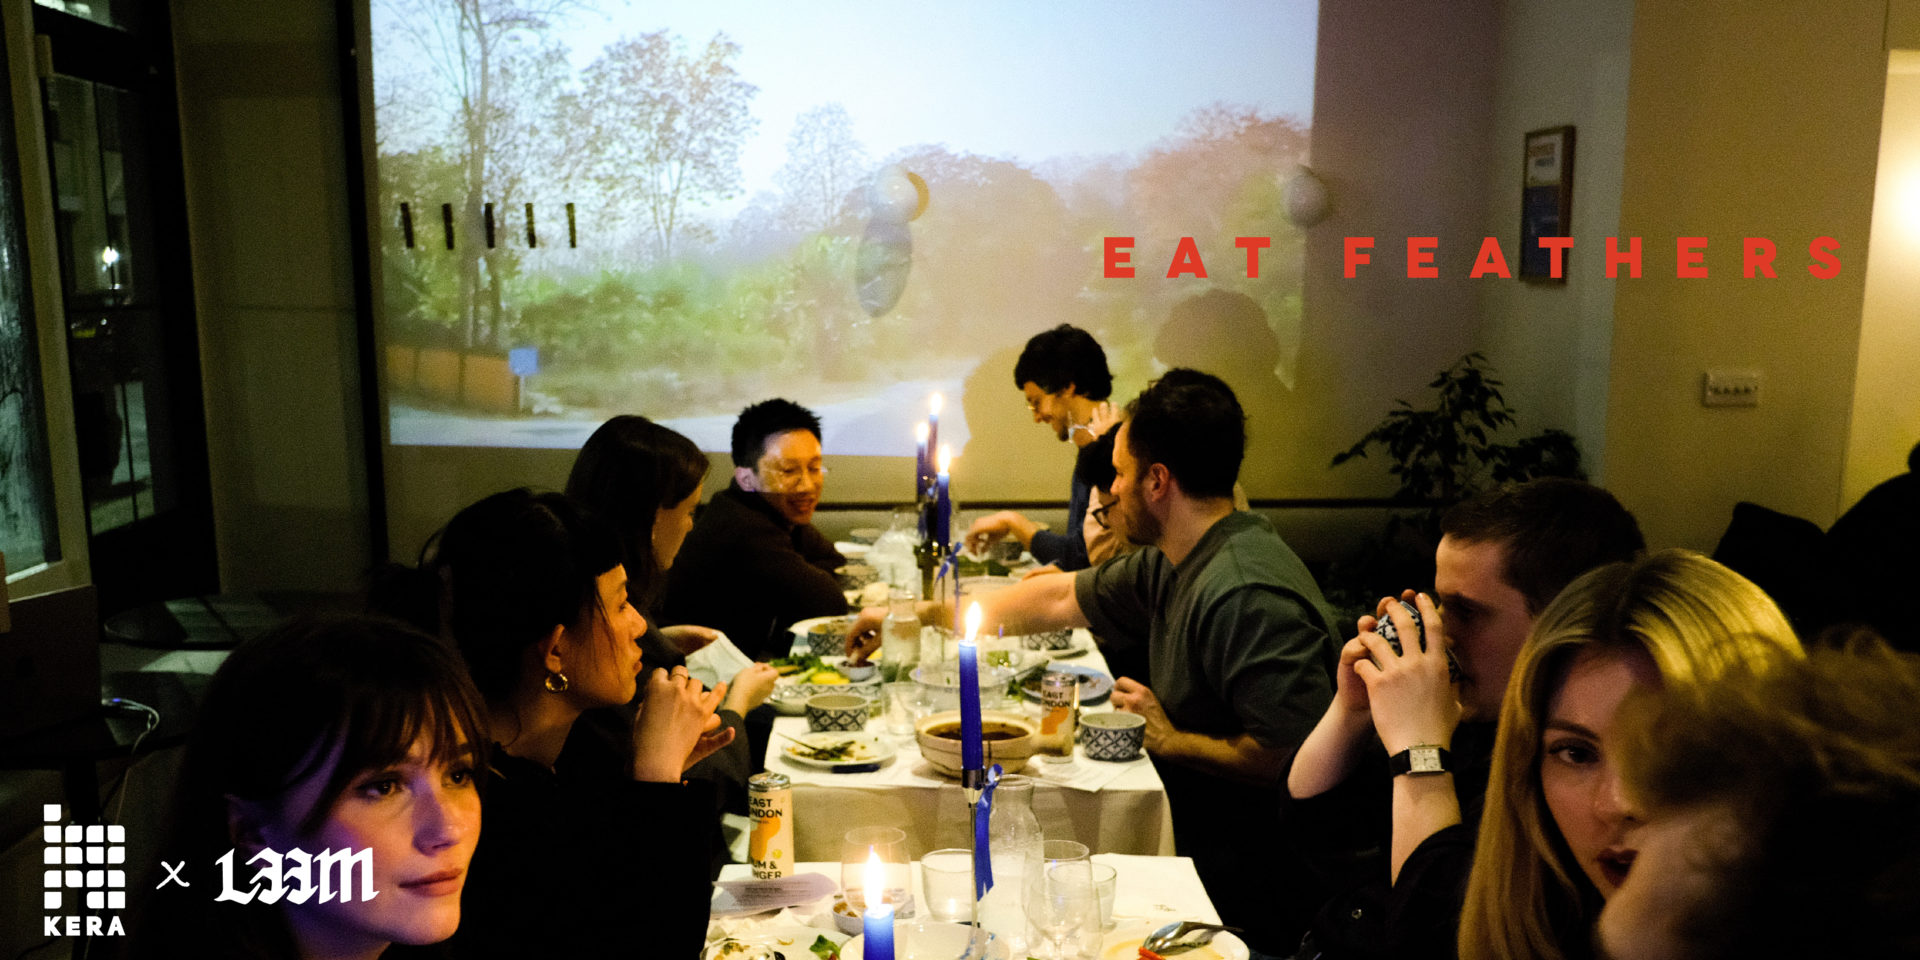 A group of people sit at a dinner table, talking, eating and drinking.